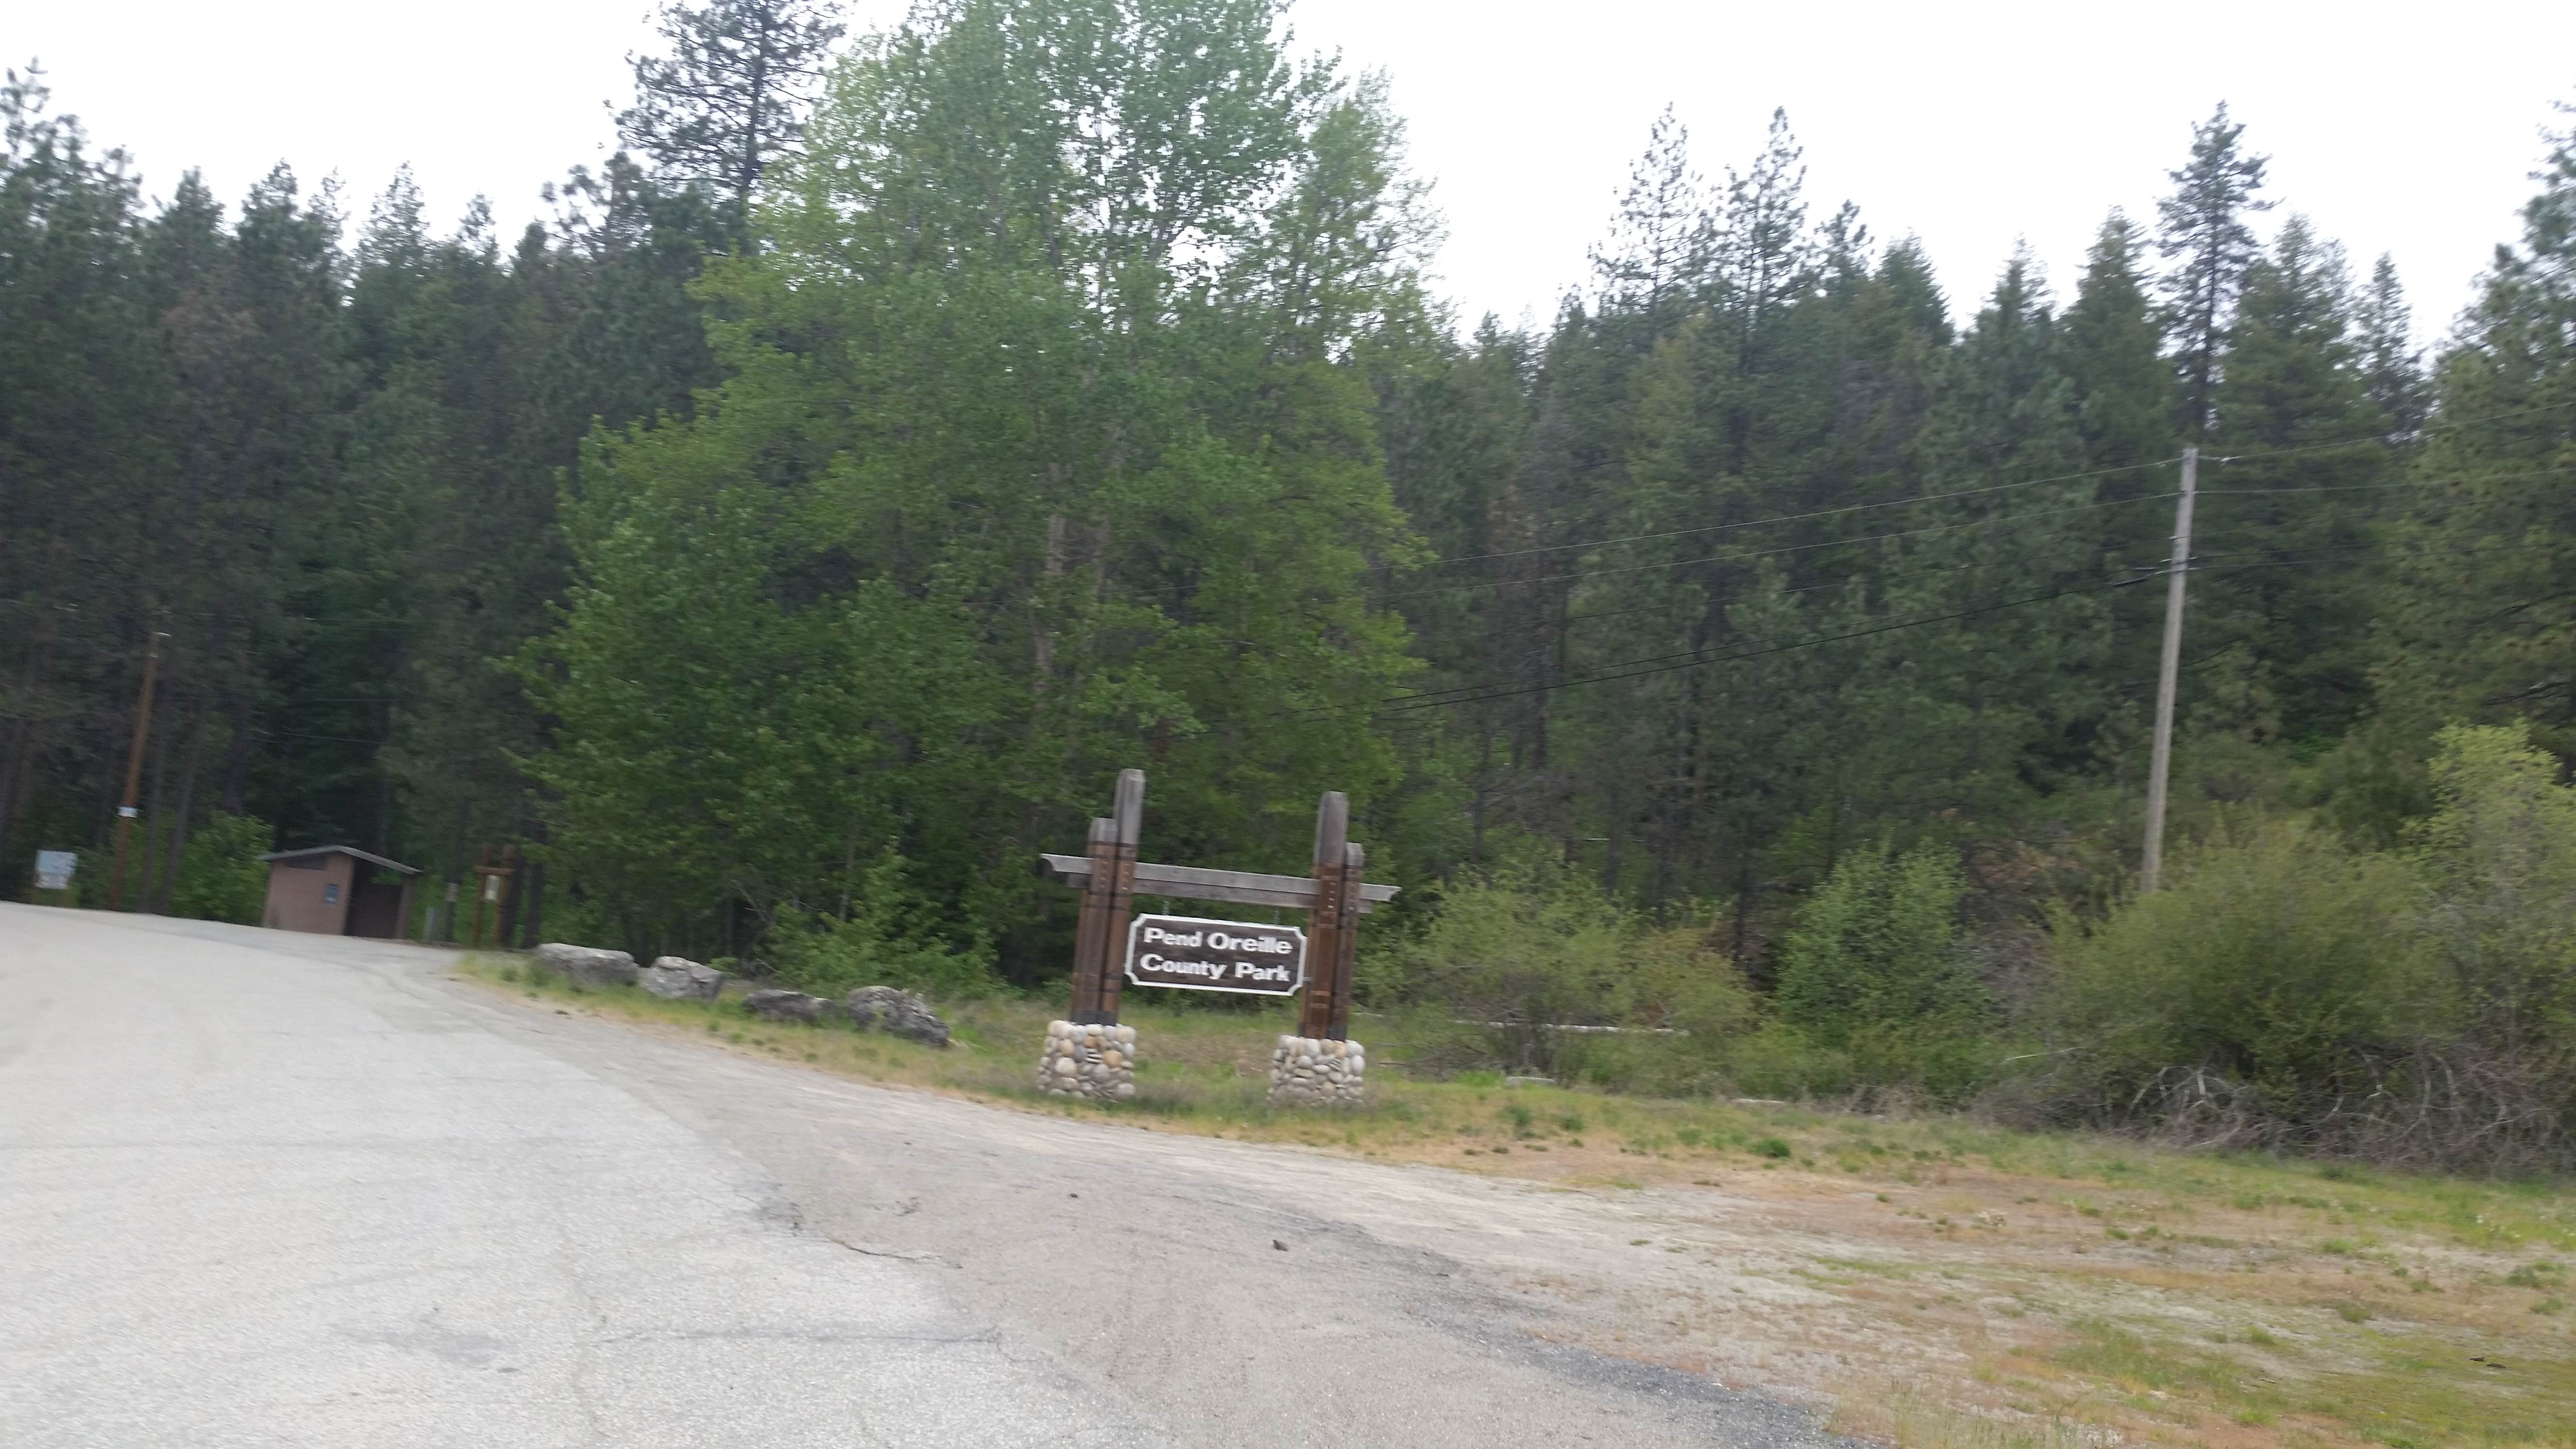 Camper submitted image from Pend Oreille County Park - 4